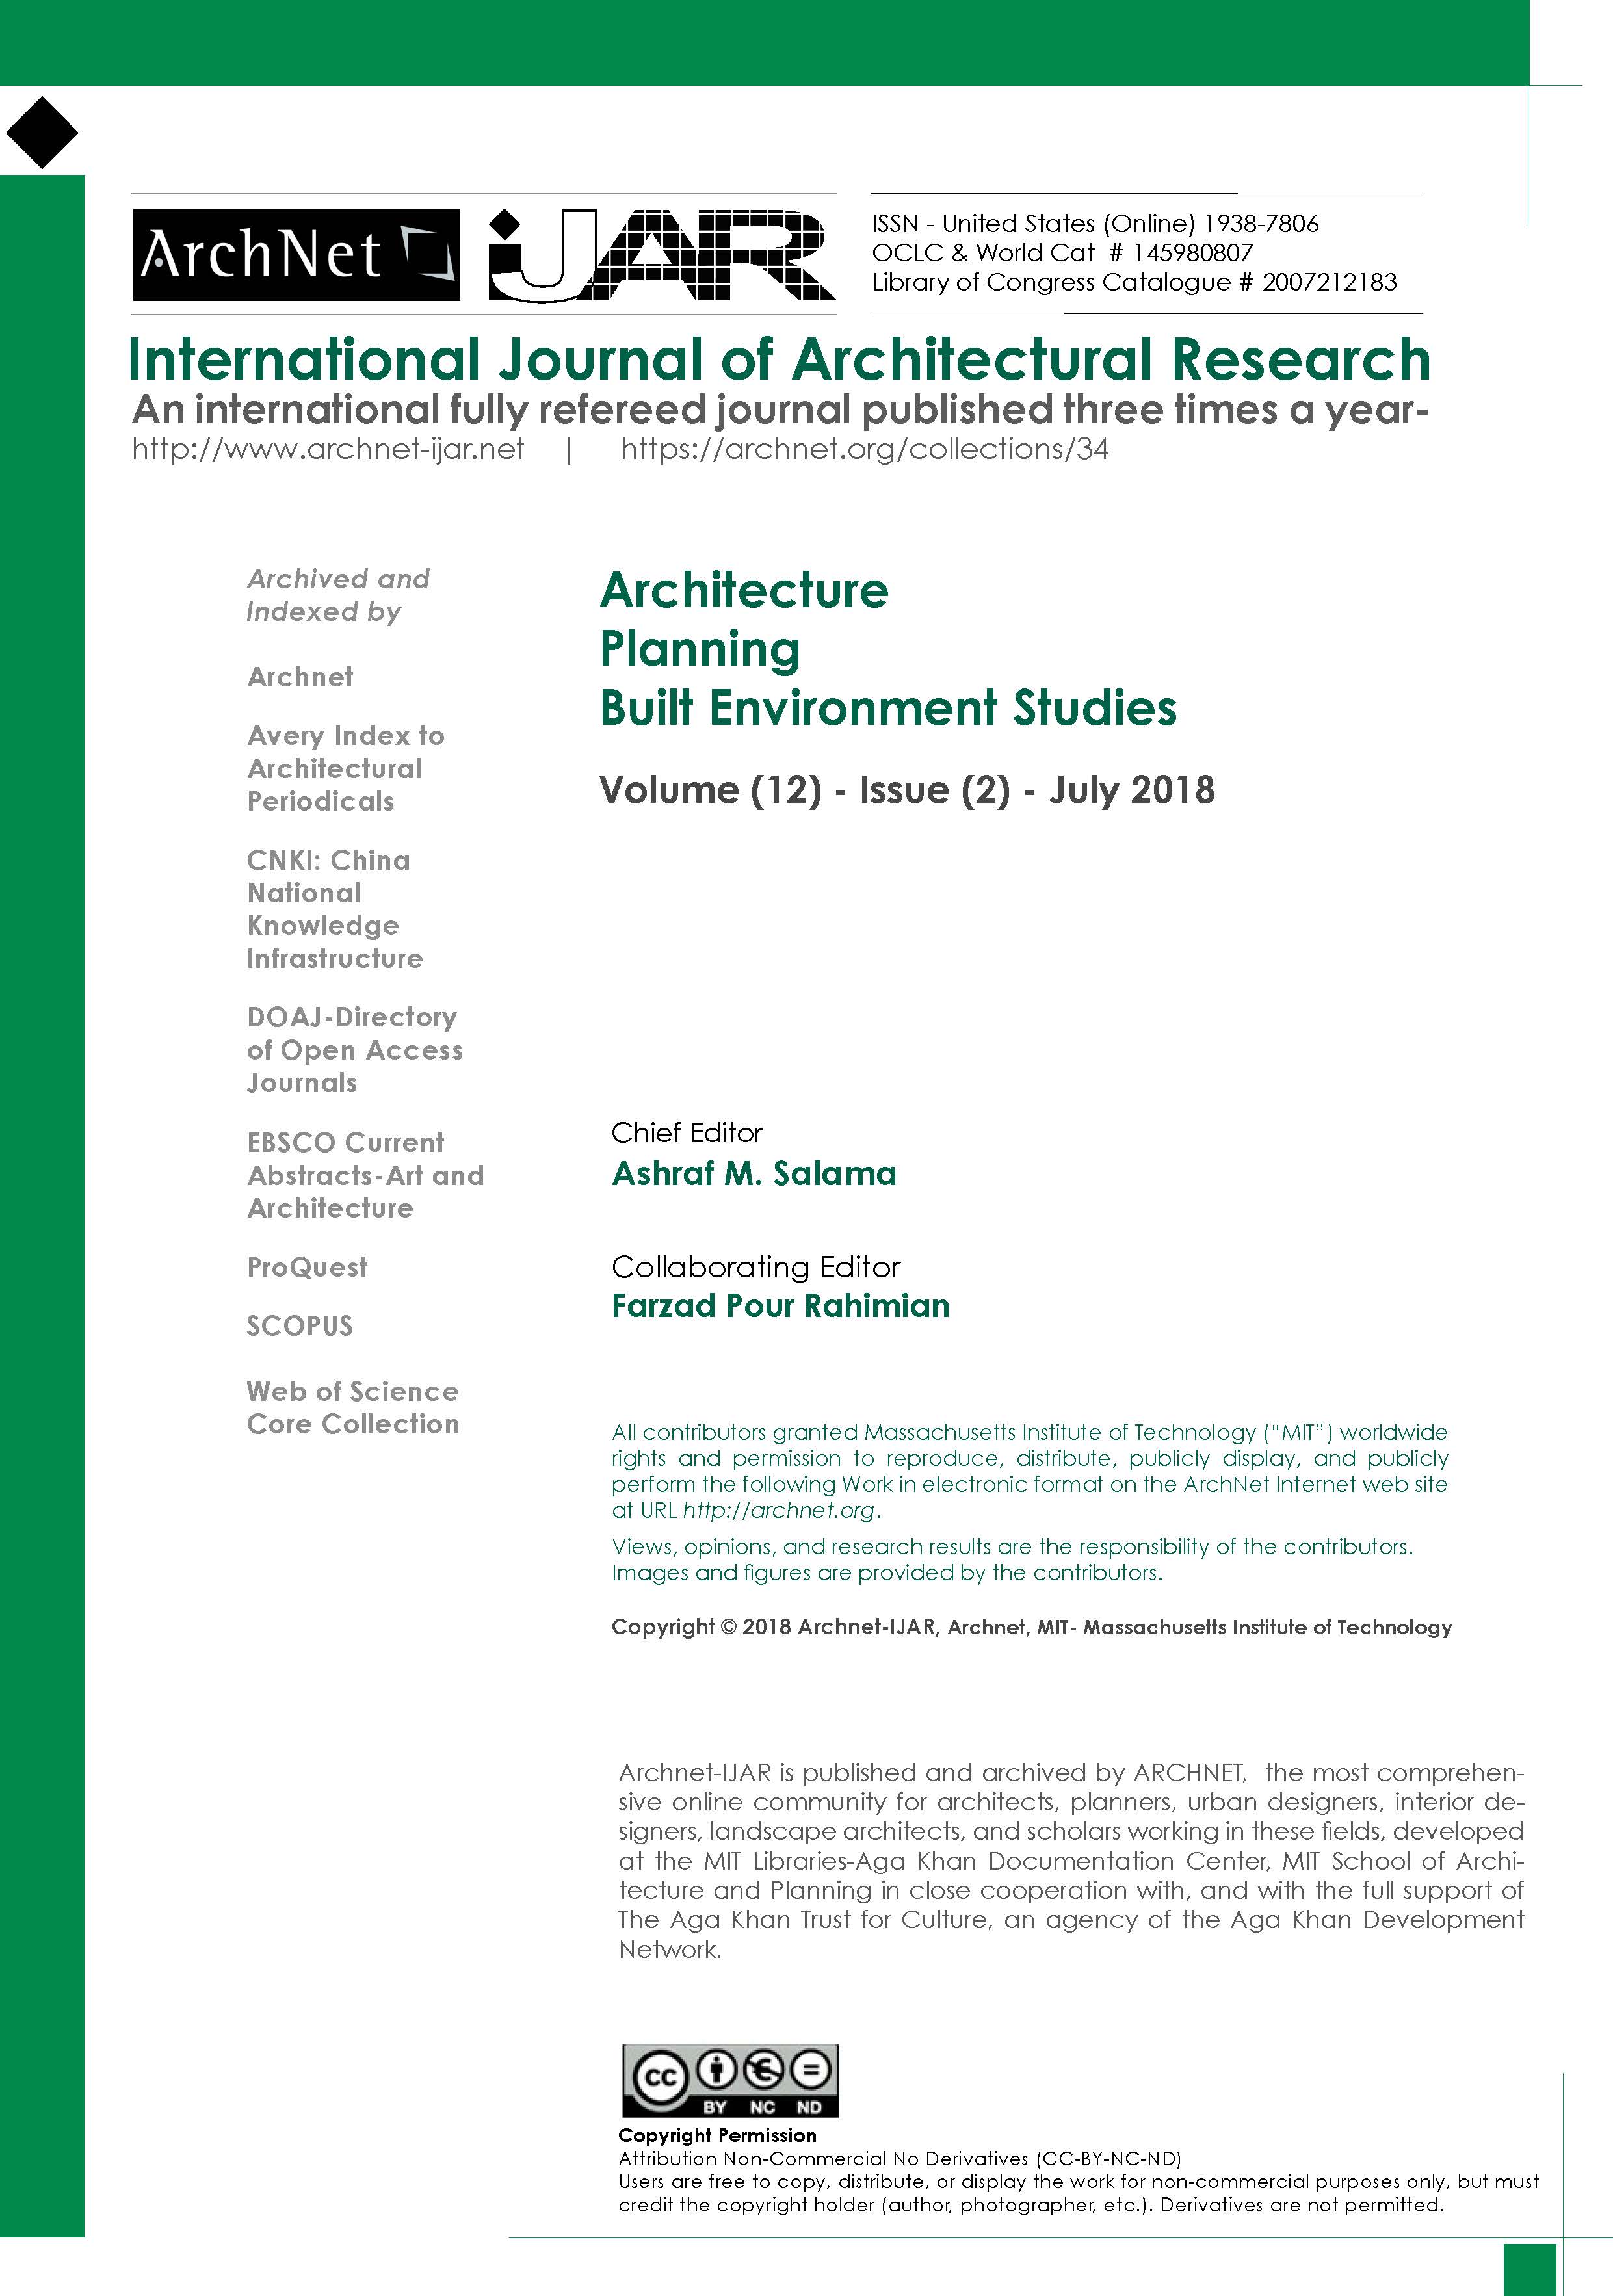 Farzad Pour Rahimian - <div style="text-align: justify;"><span style="color: rgb(1, 1, 1);">Archnet-IJAR International Journal of Architectural Research is an interdisciplinary, fully-refereed scholarly online journal of architecture, planning, and built environment studies. Two international boards (advisory and editorial) ensure the quality of scholarly papers and allow for a comprehensive academic review of contributions spanning a wide spectrum of issues, methods, theoretical approaches and architectural and development practices.</span><span class="apple-converted-space" style="color: rgb(1, 1, 1);">&nbsp;</span><br></div><div style="text-align: justify;"><span style="color: rgb(1, 1, 1);"><br></span></div><span style="background-image: initial; background-position: initial; background-size: initial; background-repeat: initial; background-attachment: initial; background-origin: initial; background-clip: initial;"><div style="color: rgb(1, 1, 1); text-align: justify;">ArchNet-IJAR provides a comprehensive academic review of a wide spectrum of issues, methods, and theoretical approaches. It aims to bridge theory and practice in the fields of architectural/design research and urban planning/built environment studies, reporting on the latest research findings and innovative approaches for creating responsive environments.</div><div style="text-align: justify;"><div style="color: rgb(1, 1, 1);"><br></div></div></span>